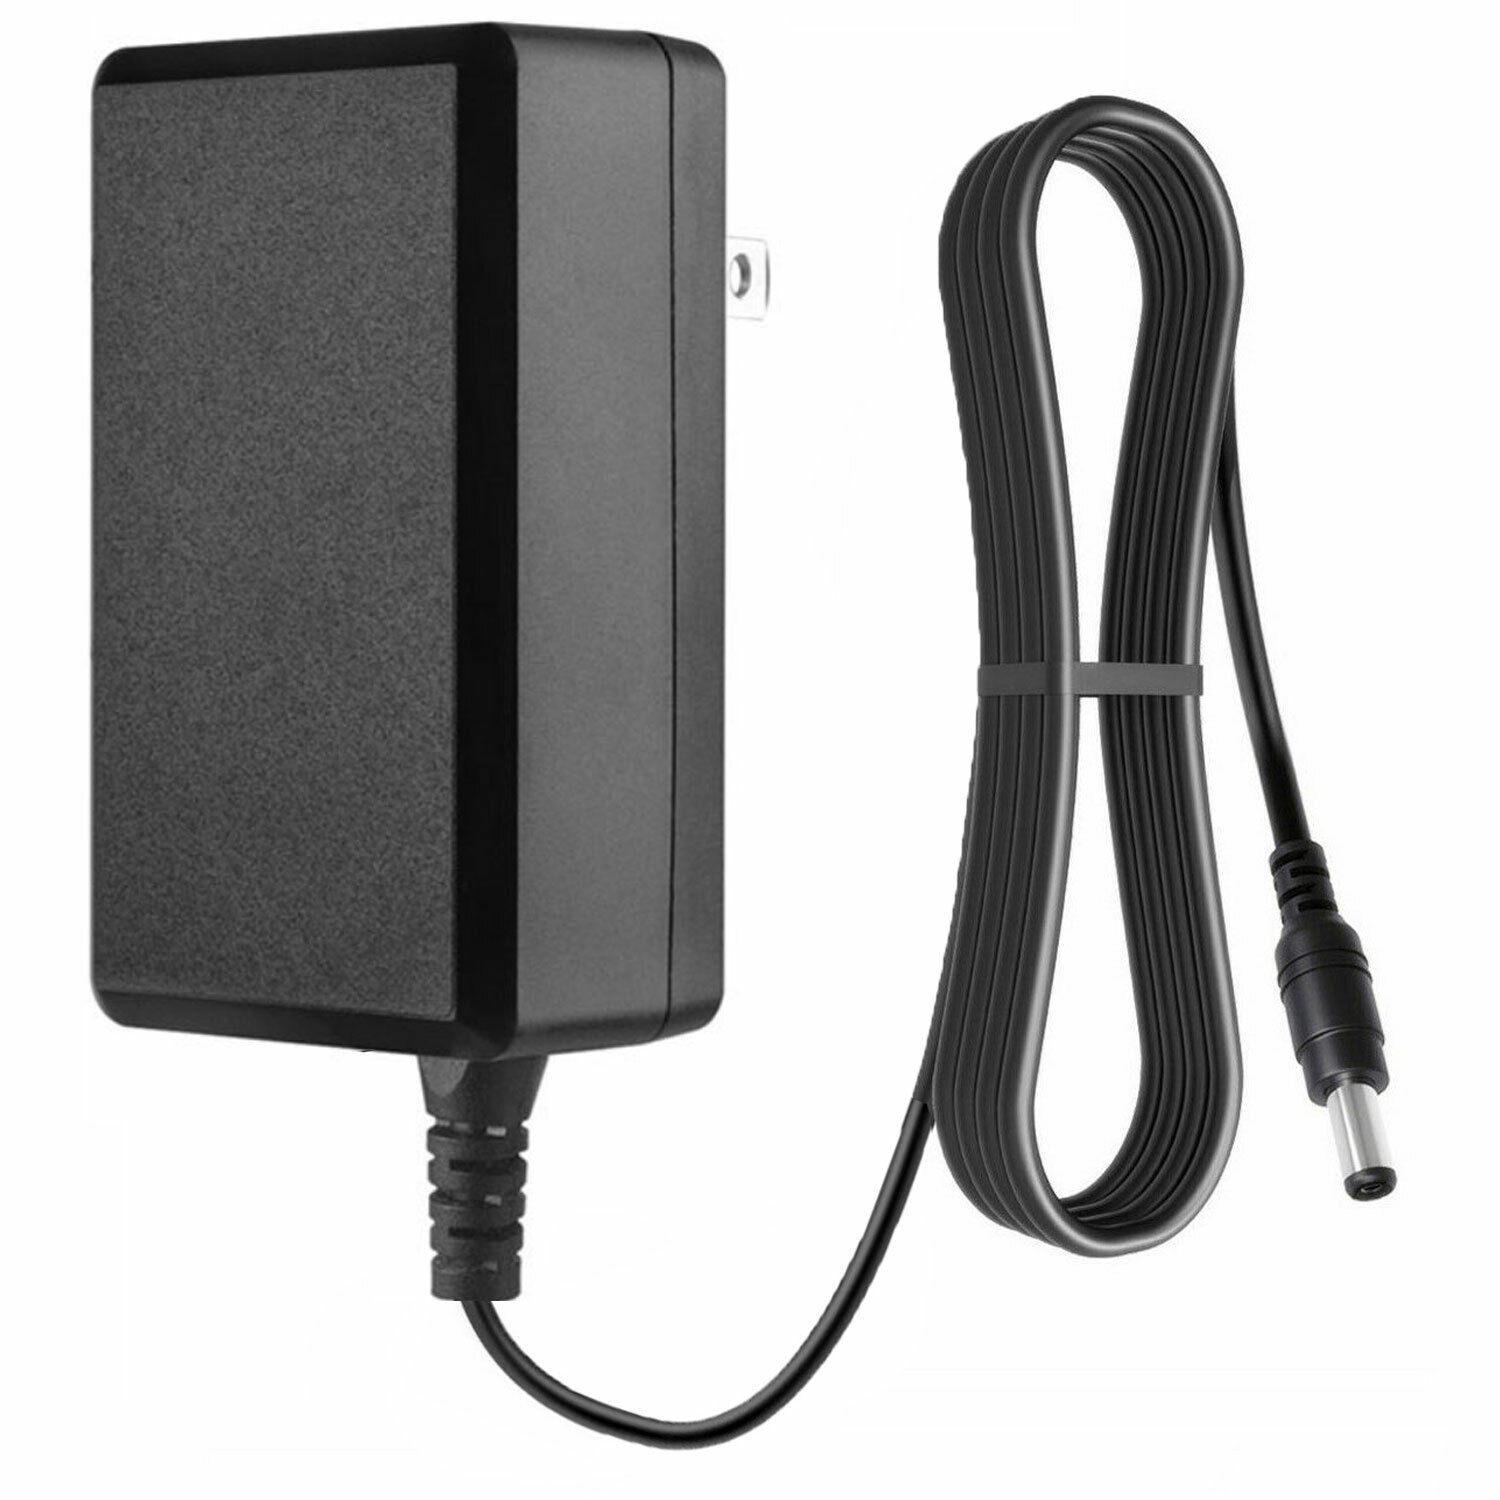 AC Adapter For EURO-PRO Techworld Charger: AD-0920-UL 7.5V Power Supply Cord NEW Technical Specifications: 1 AC input v